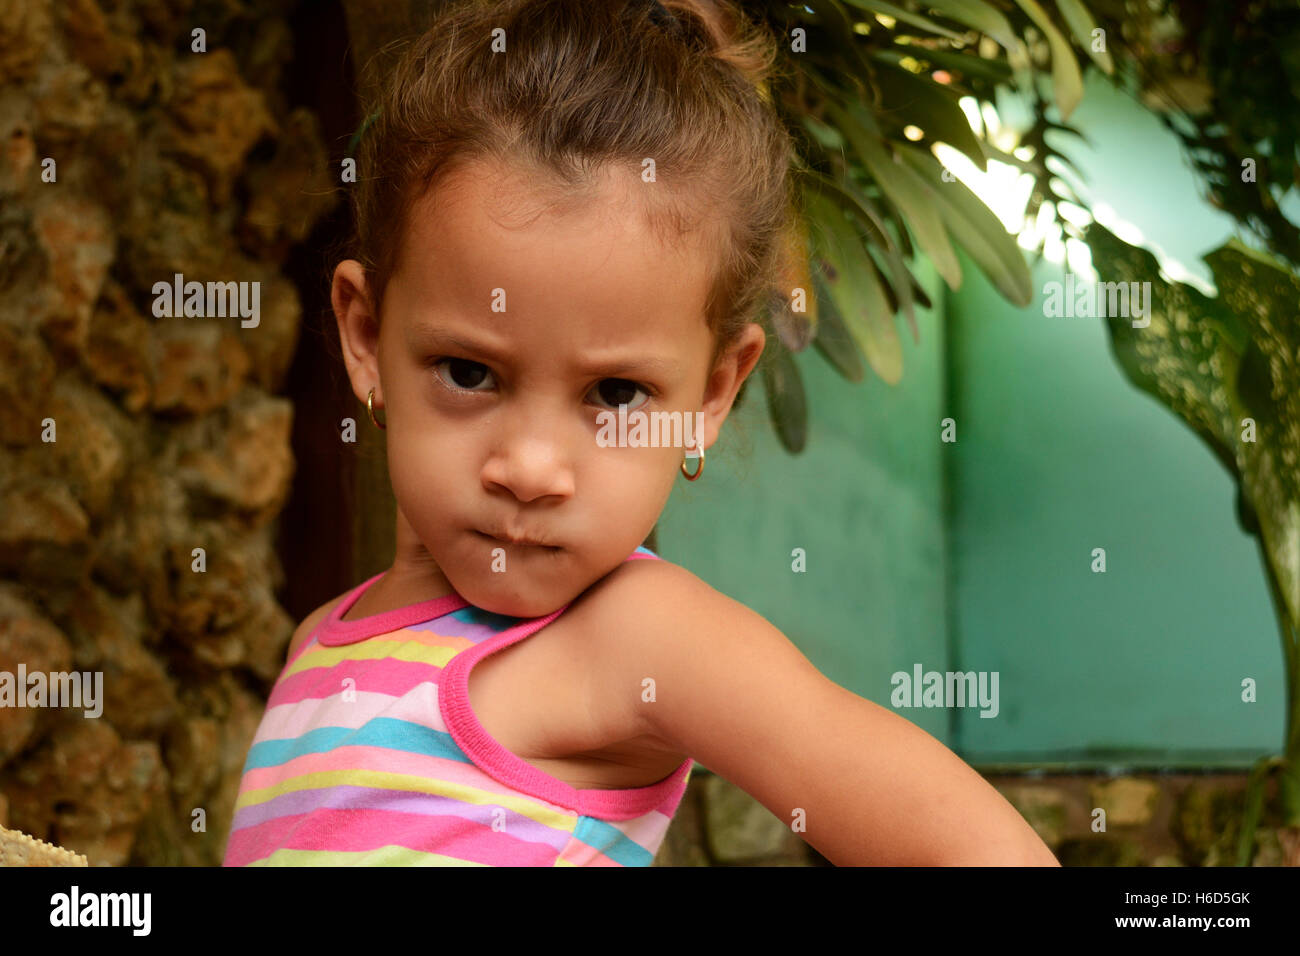 Little girl with funny face Stock Photo